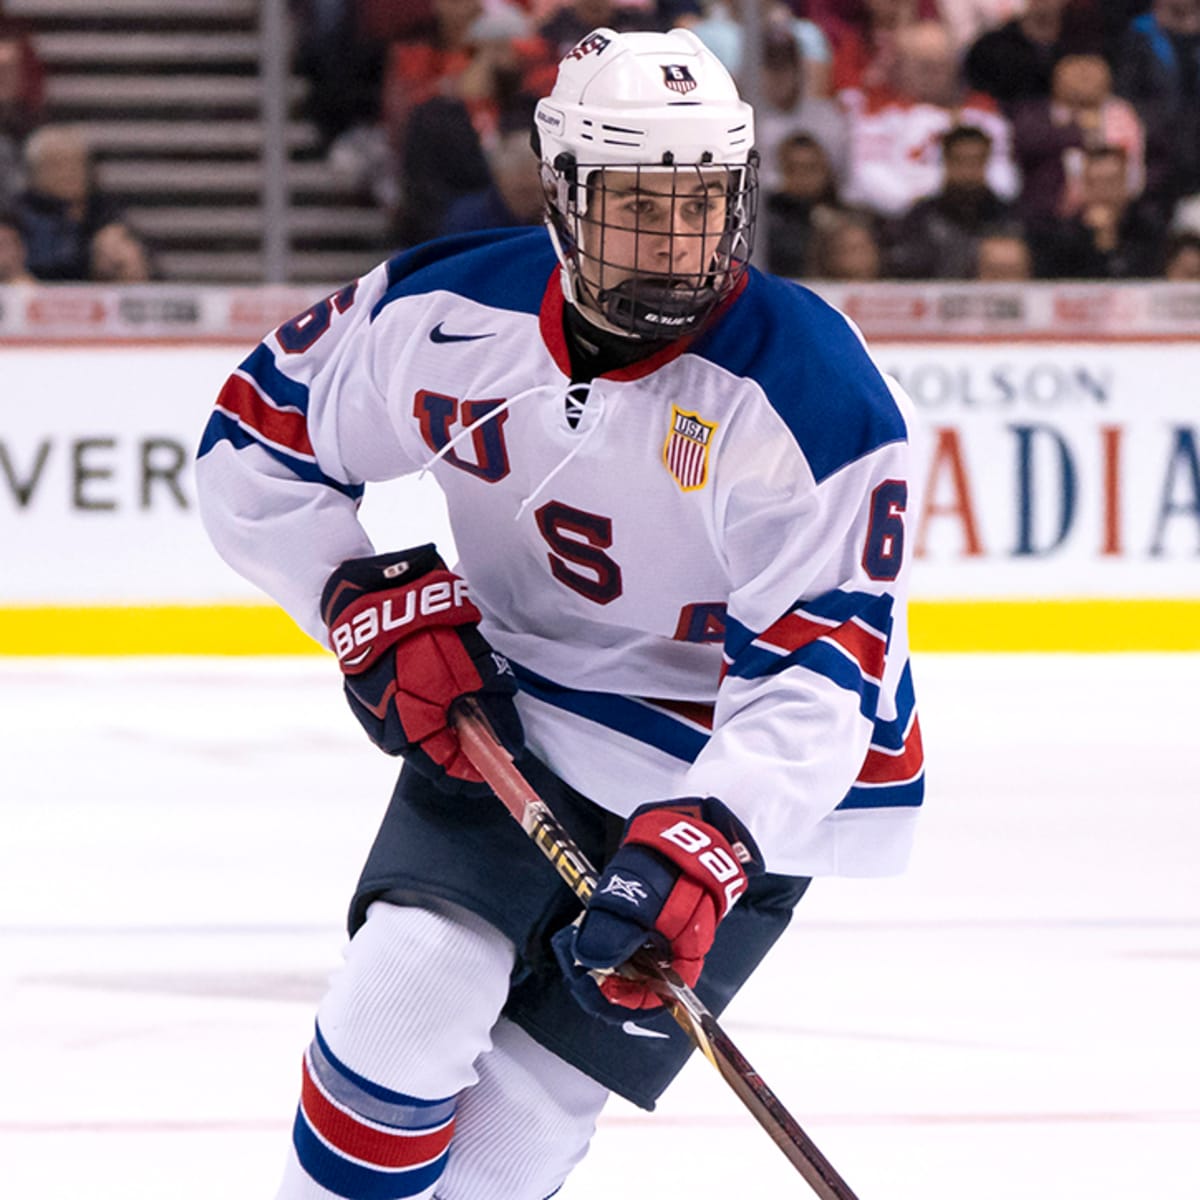 Jack Hughes Is Ready for More - The Hockey News